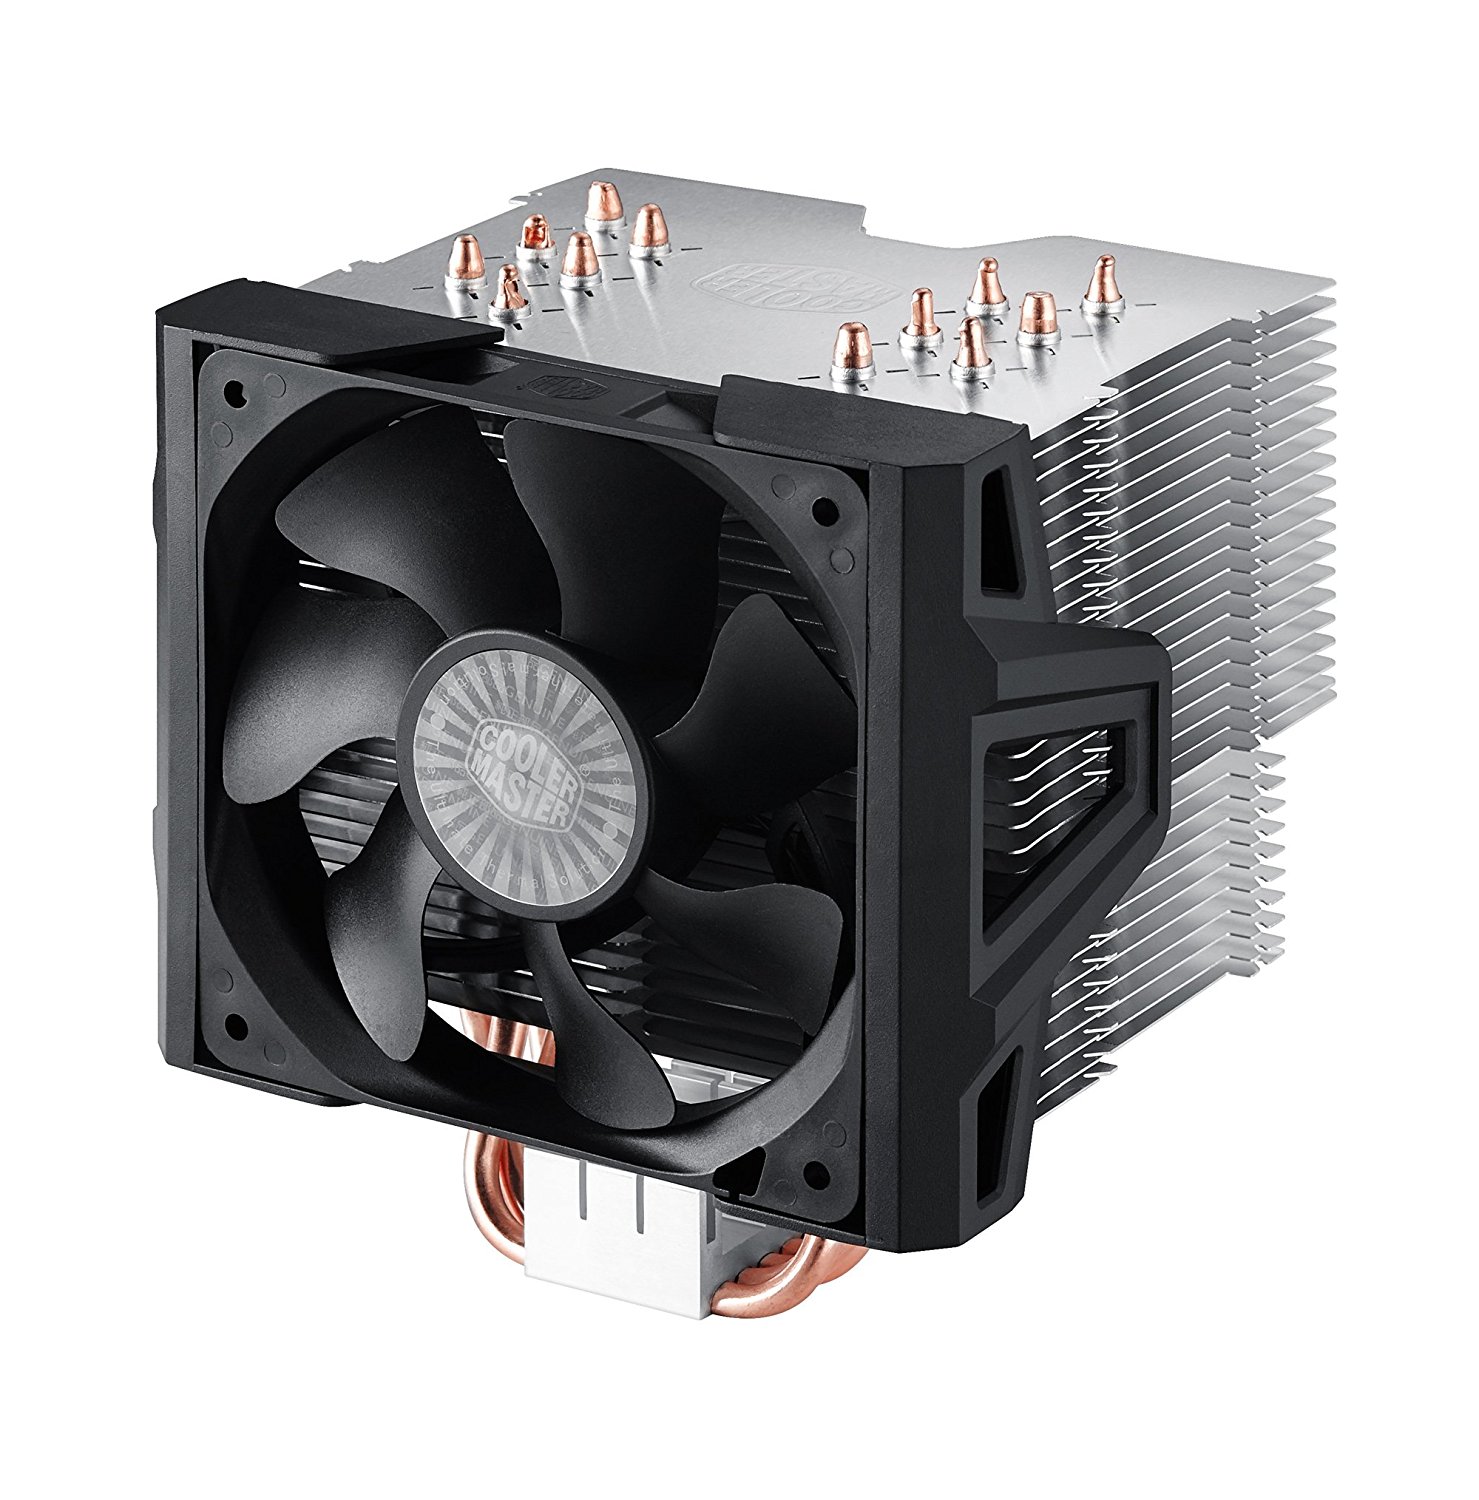 Cooler Master Hyper 612 Ver.2 - Silent CPU Air Cooler with 6 Direct Contact Heatpipes and Folding Fin Structure (RR-H6V2-13PK-R1) - image 1 of 10